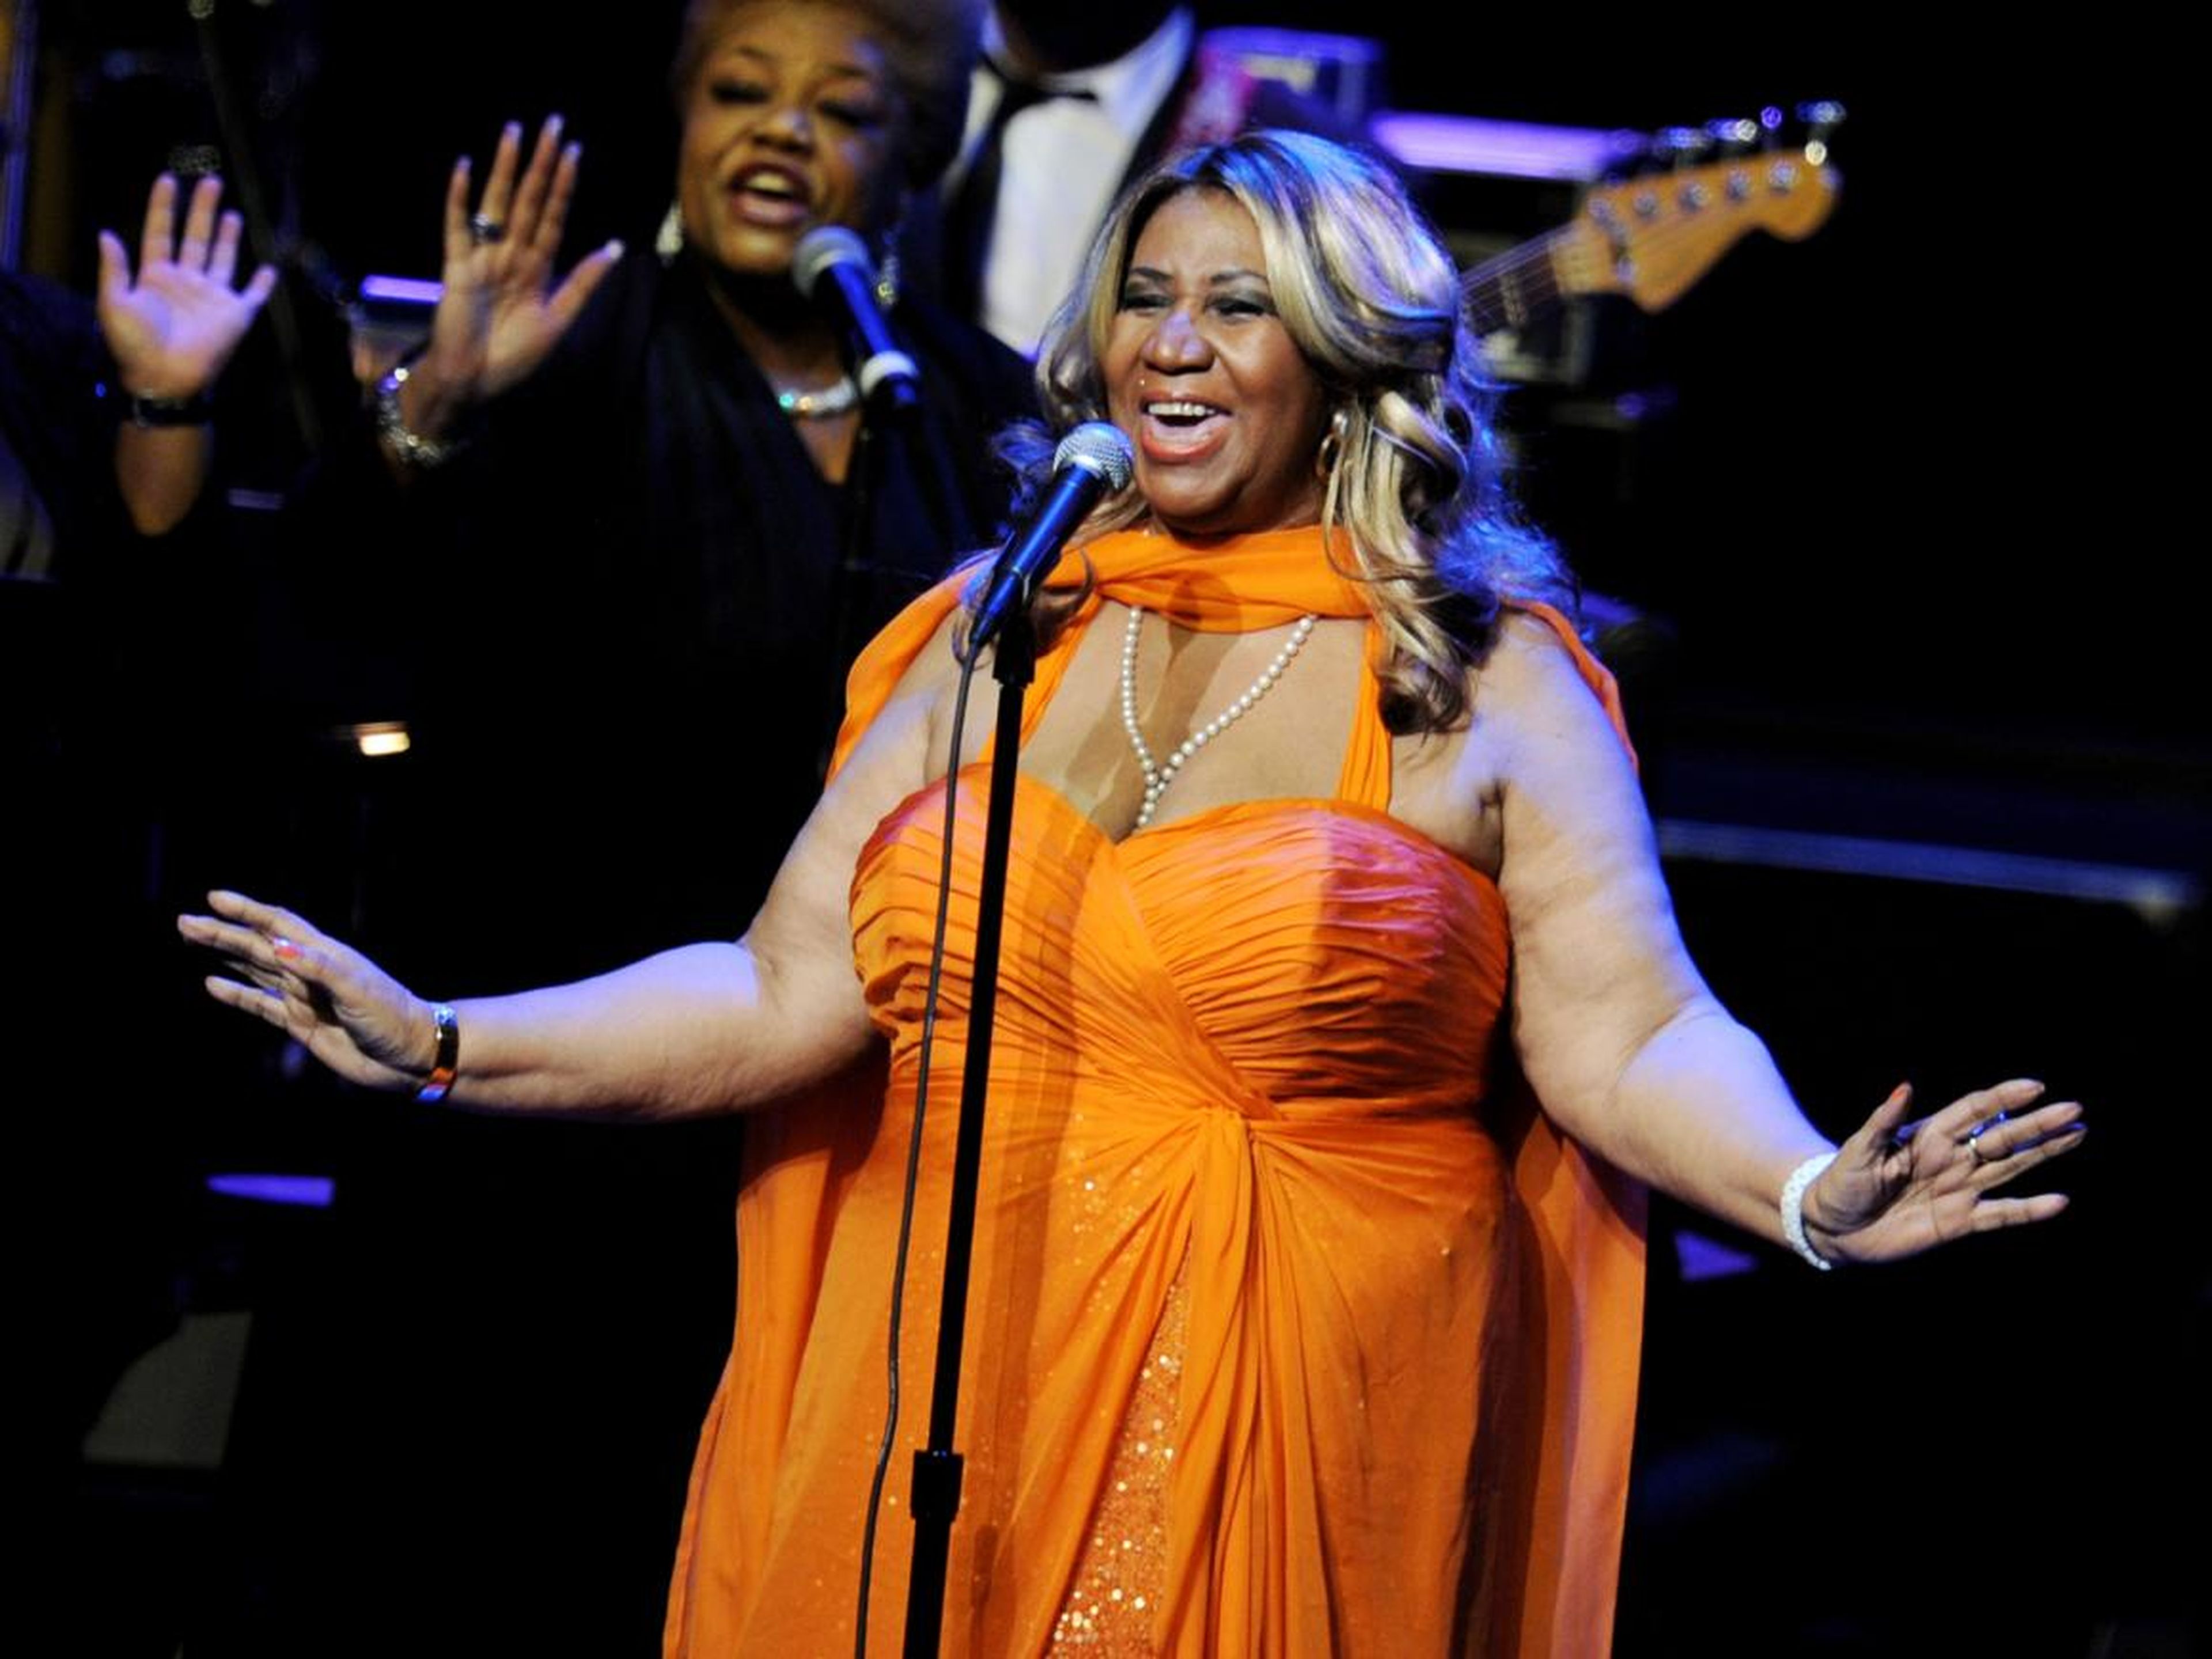 Aretha Franklin was first female inducted into the Rock and Roll Hall of Fame in 1987.